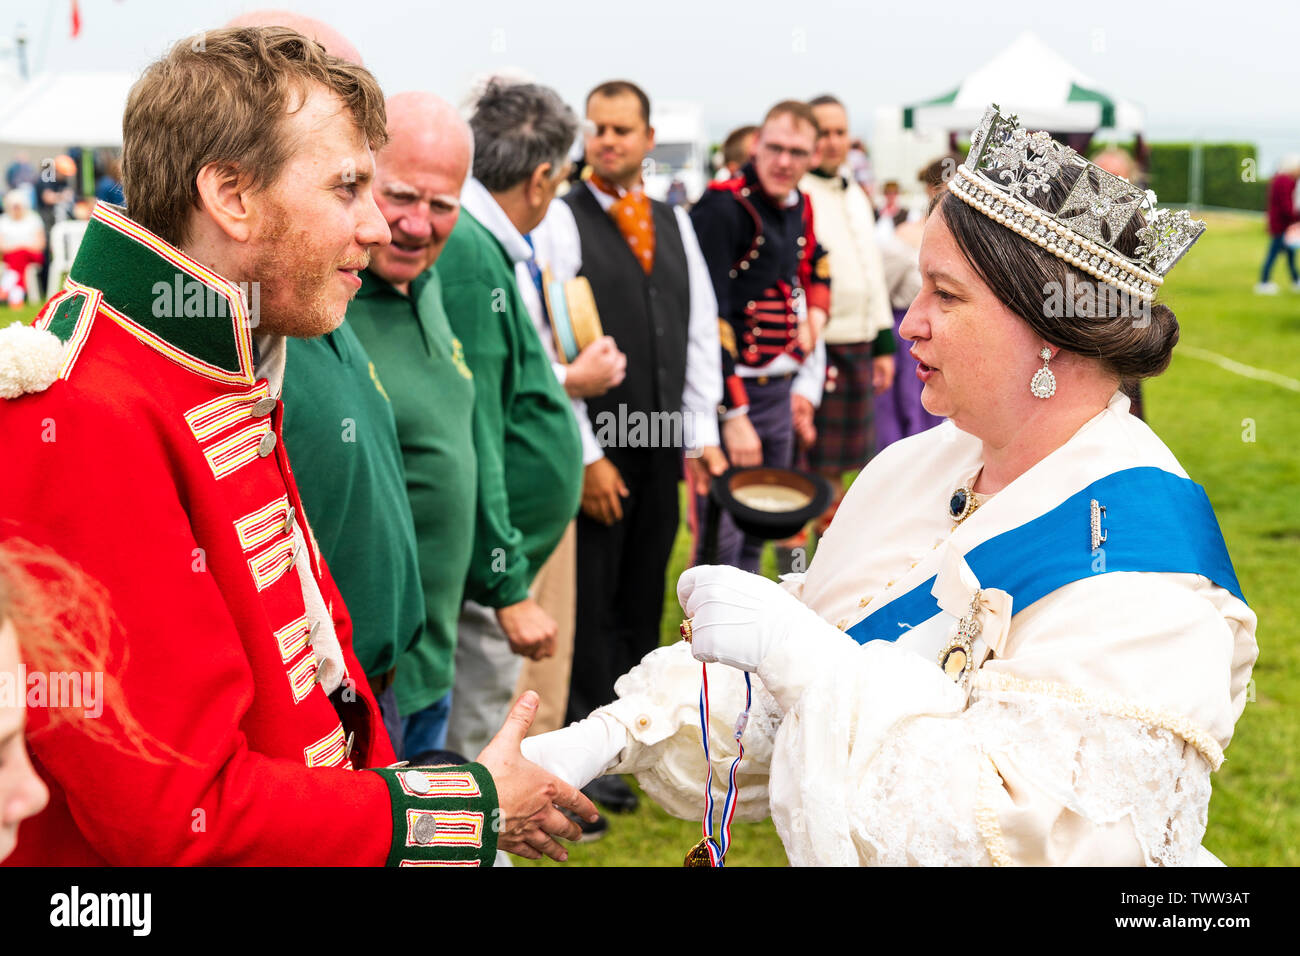 Broadstairs Dickens Festival. People dressed in Victorian Dickensian costume. Queen Victoria look-a-like shaking the hand of redcoat soldier who she is about to present with a medal. Close up. Stock Photo